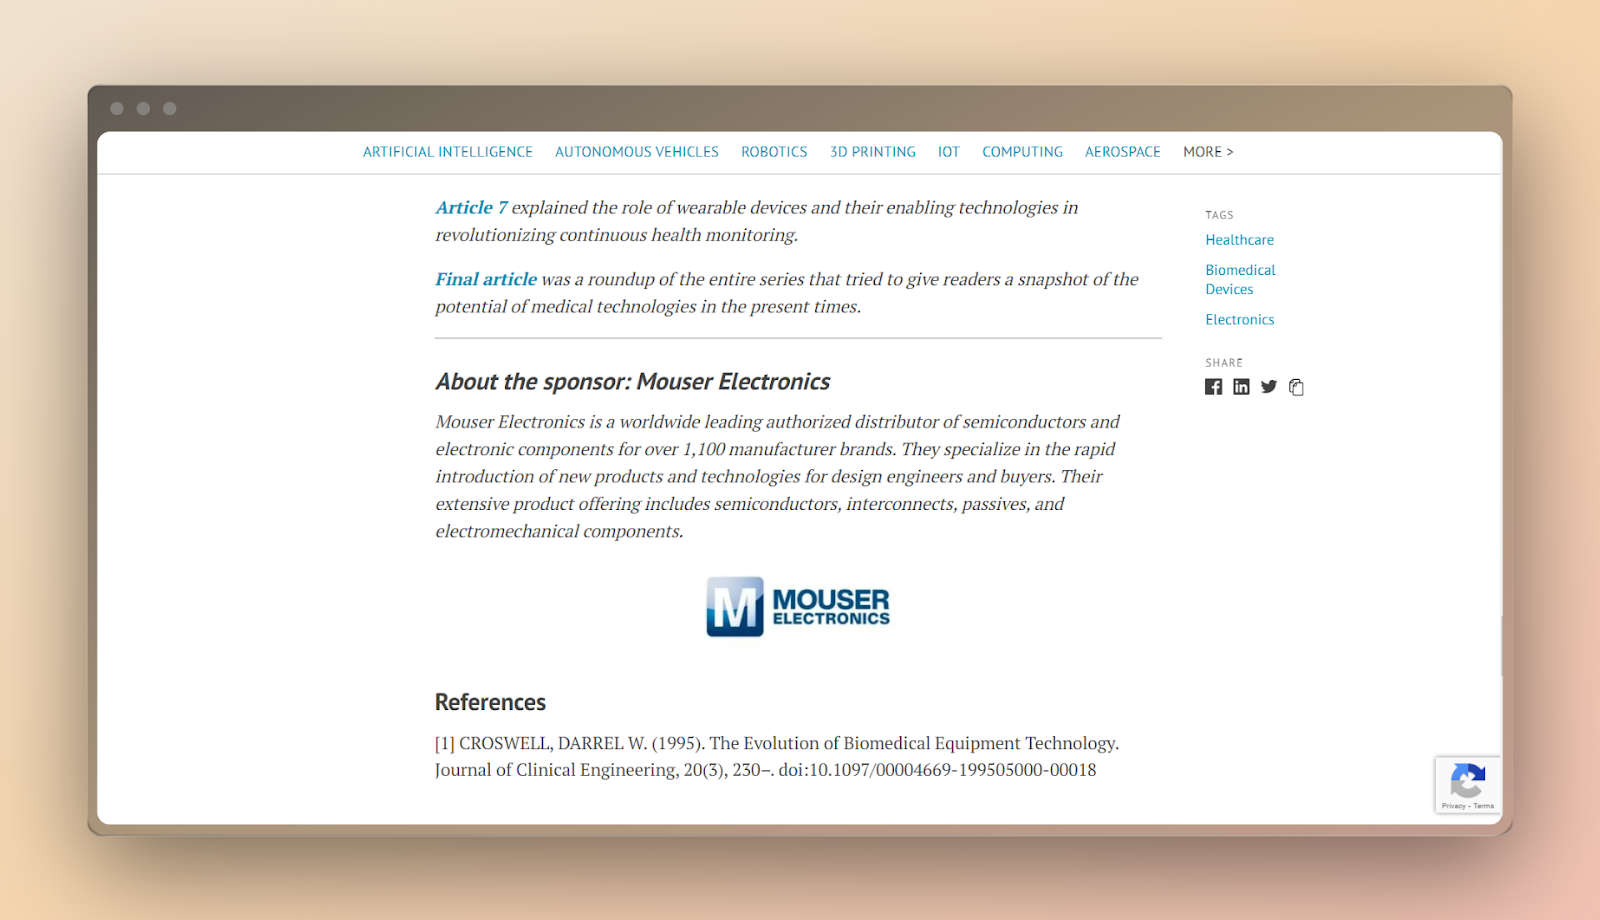 mouser-electronics-sponsored-article